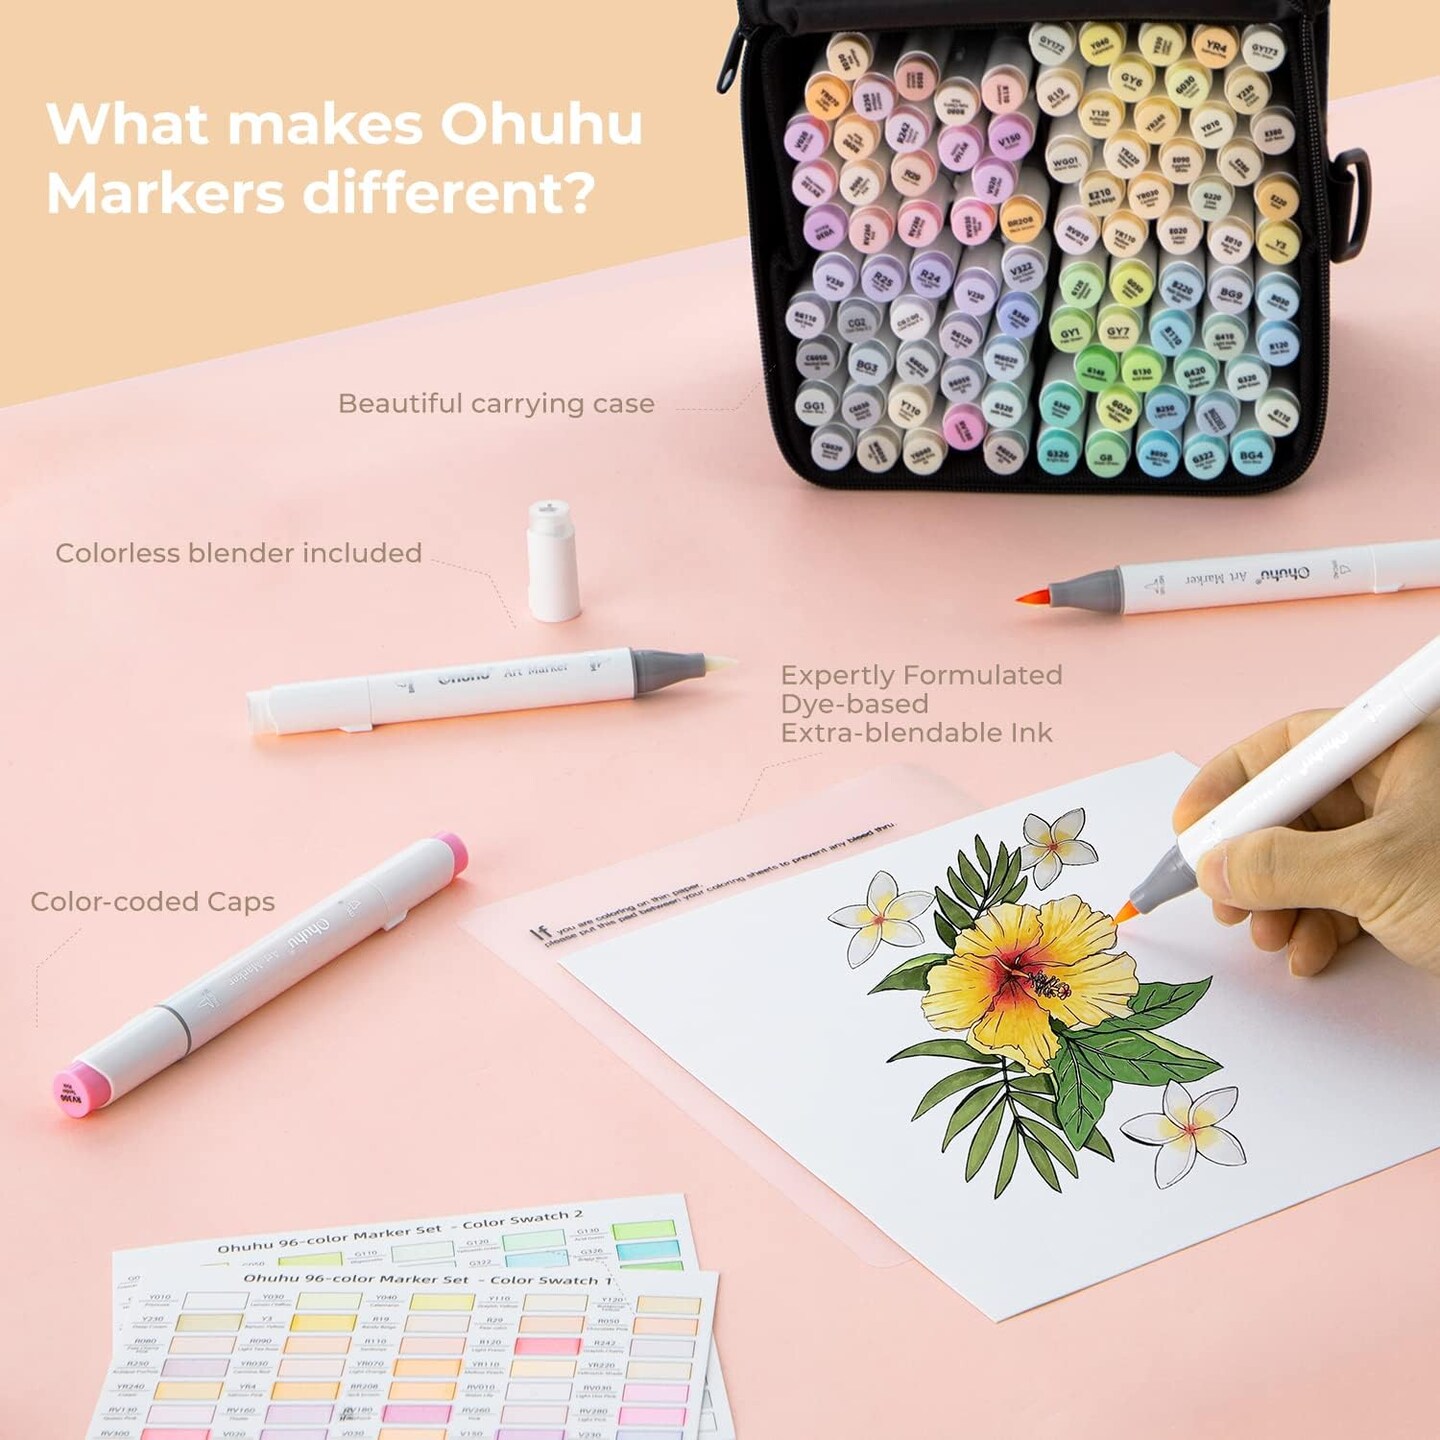 Ohuhu Pastel Markers Alcohol Based -96 Pastel Colors of Honolulu Sweetness  + Blossoming - Double Tipped Art Alcohol Markers for Artist Adults'  Coloring Illustration - Brush & Chisel - Refillable Ink